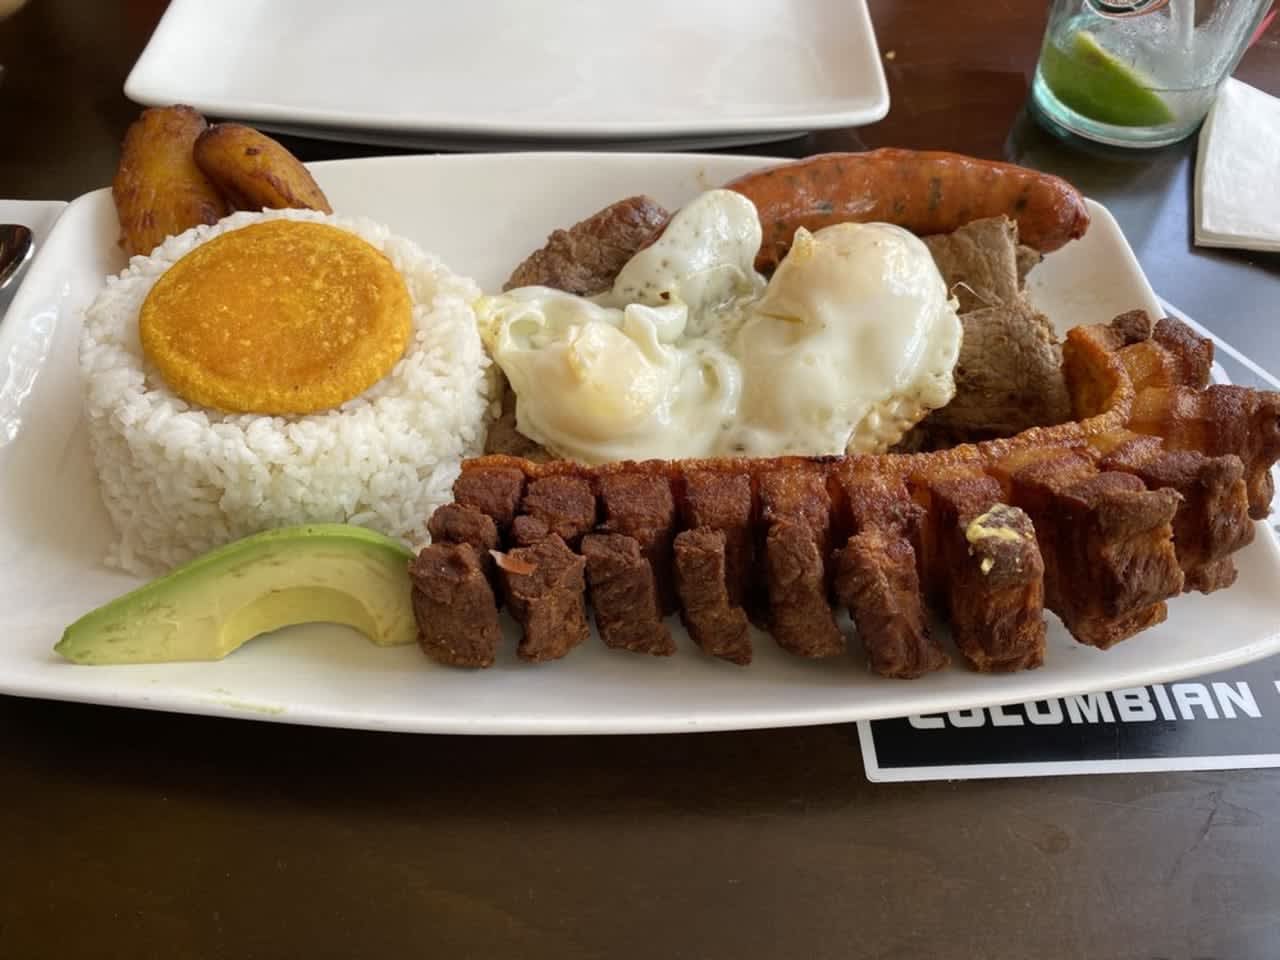 Colombian House currently operates a location in New Rochelle, and owners plan to open another location in White Plains.